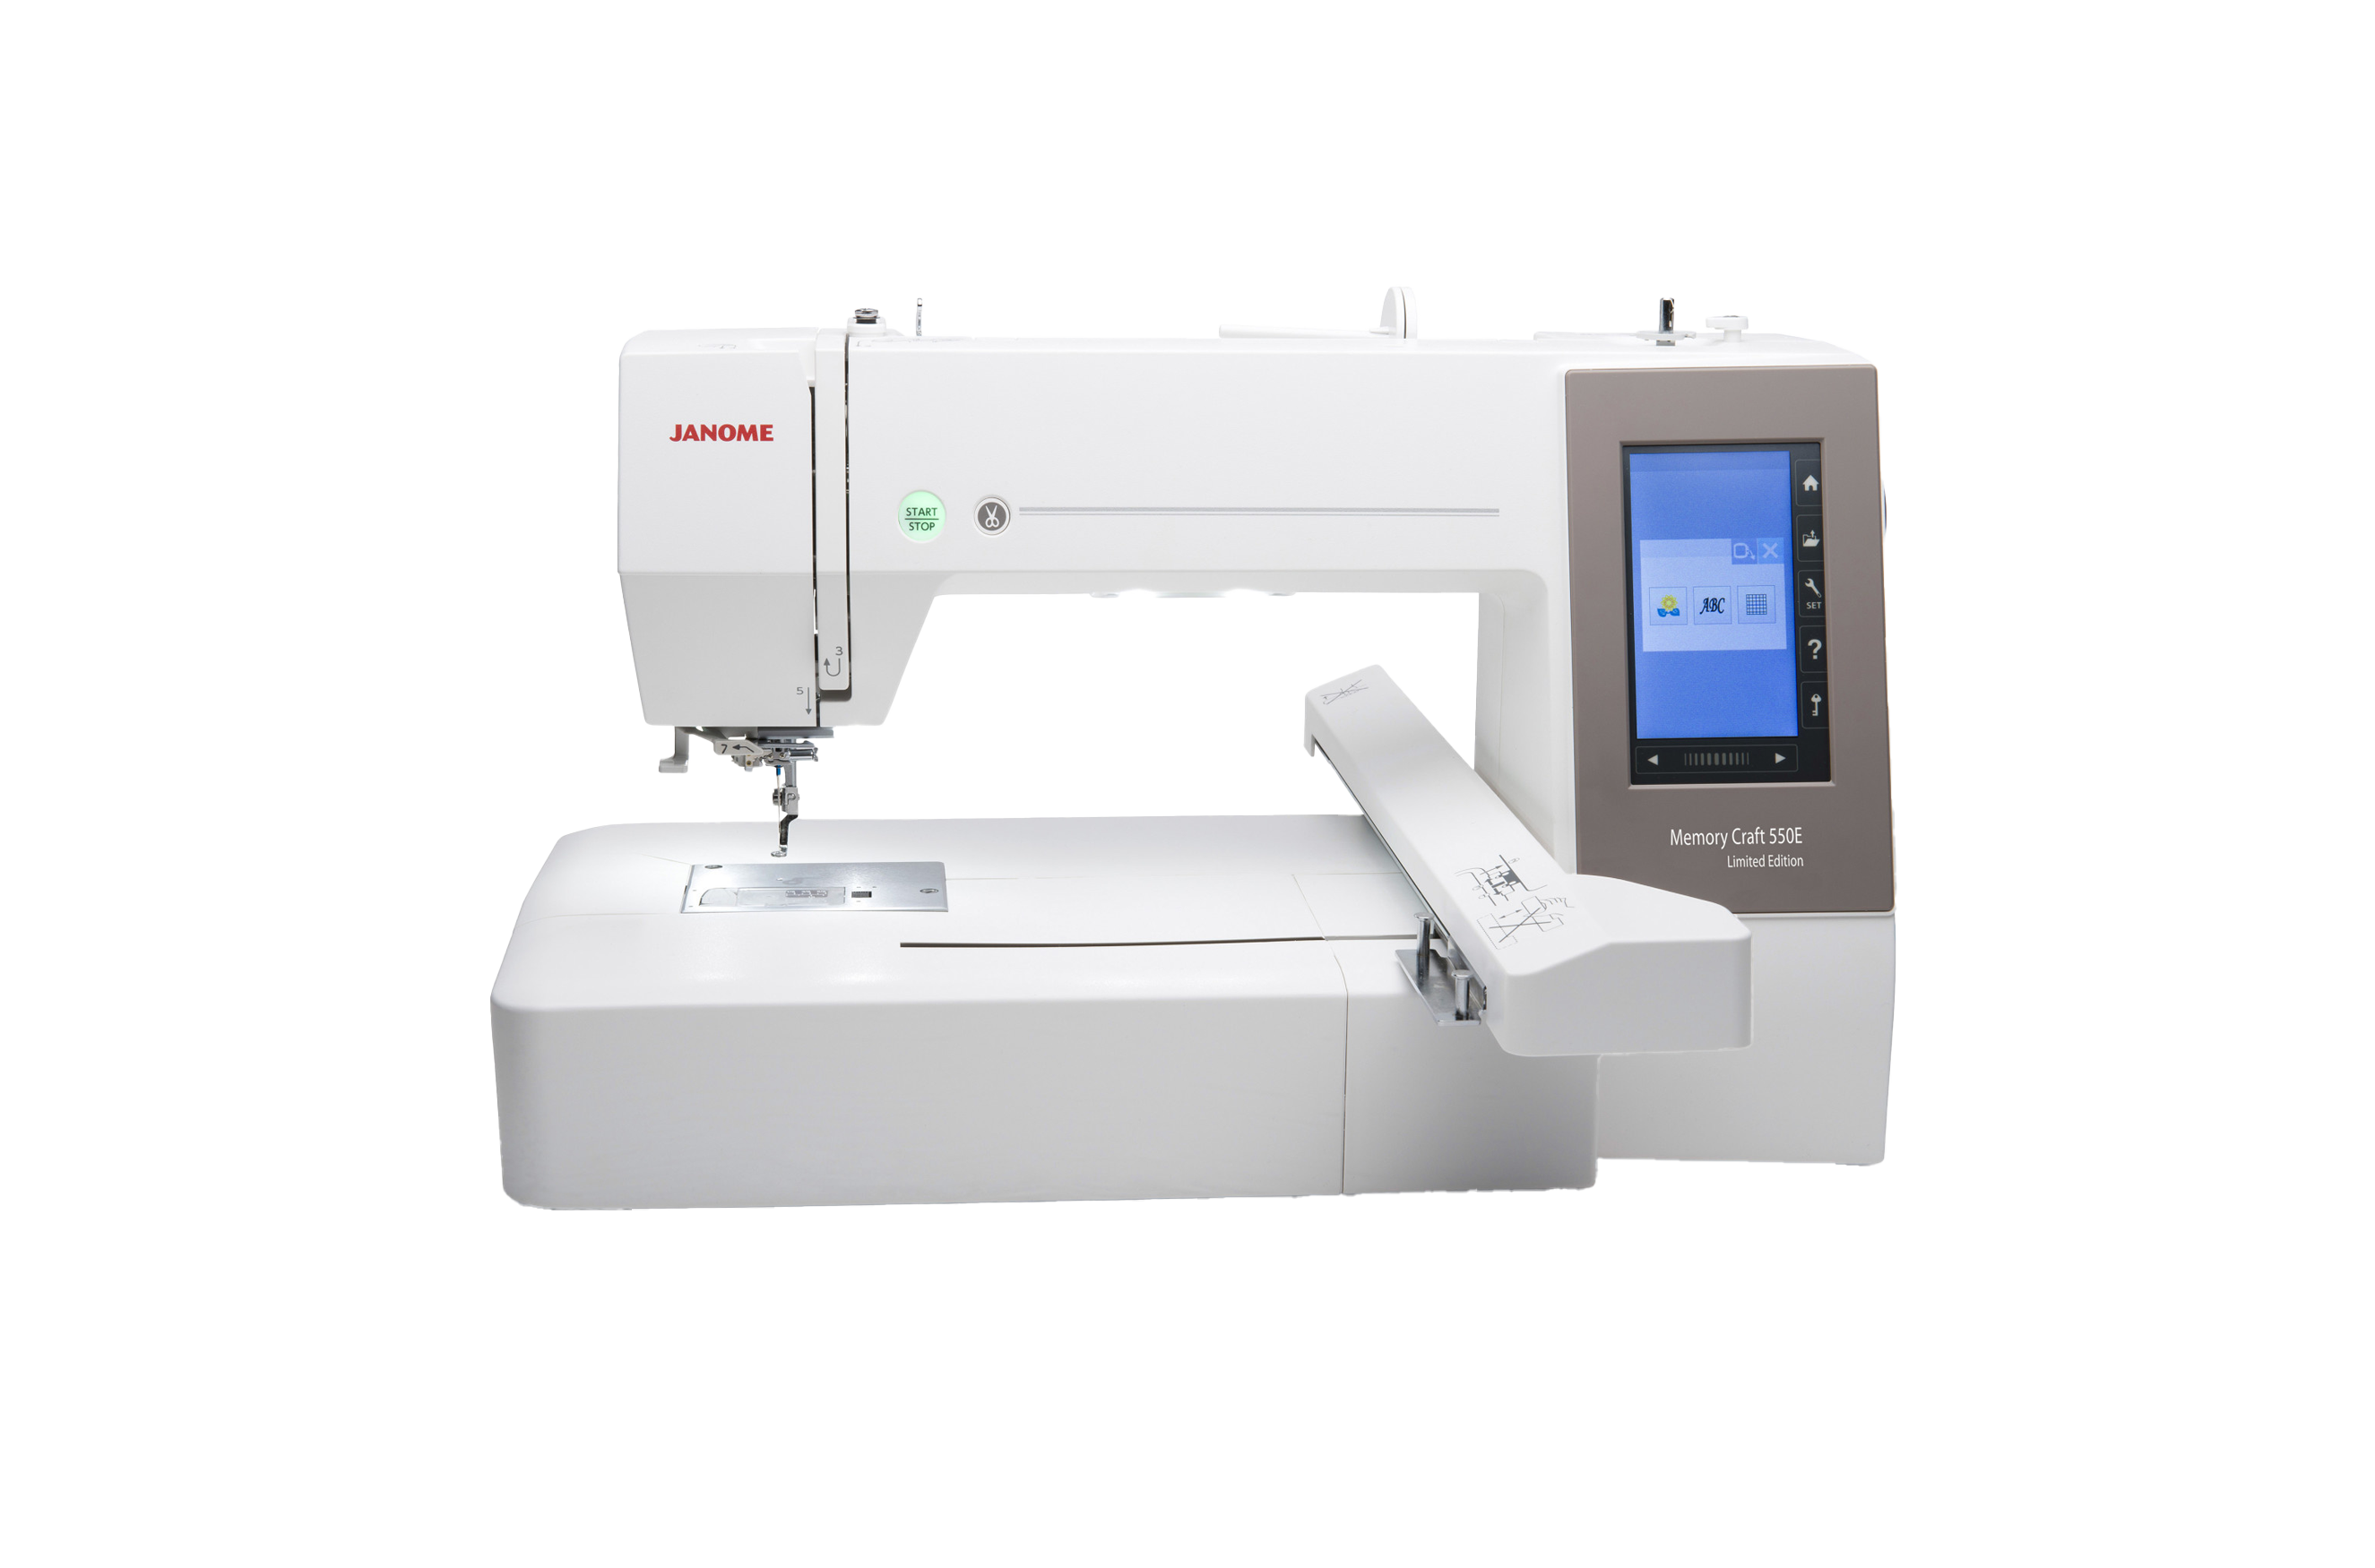 Janome Memory Craft 550E Limited Edition Embroidery Machine 14x7.9 for Sale at World Weidner